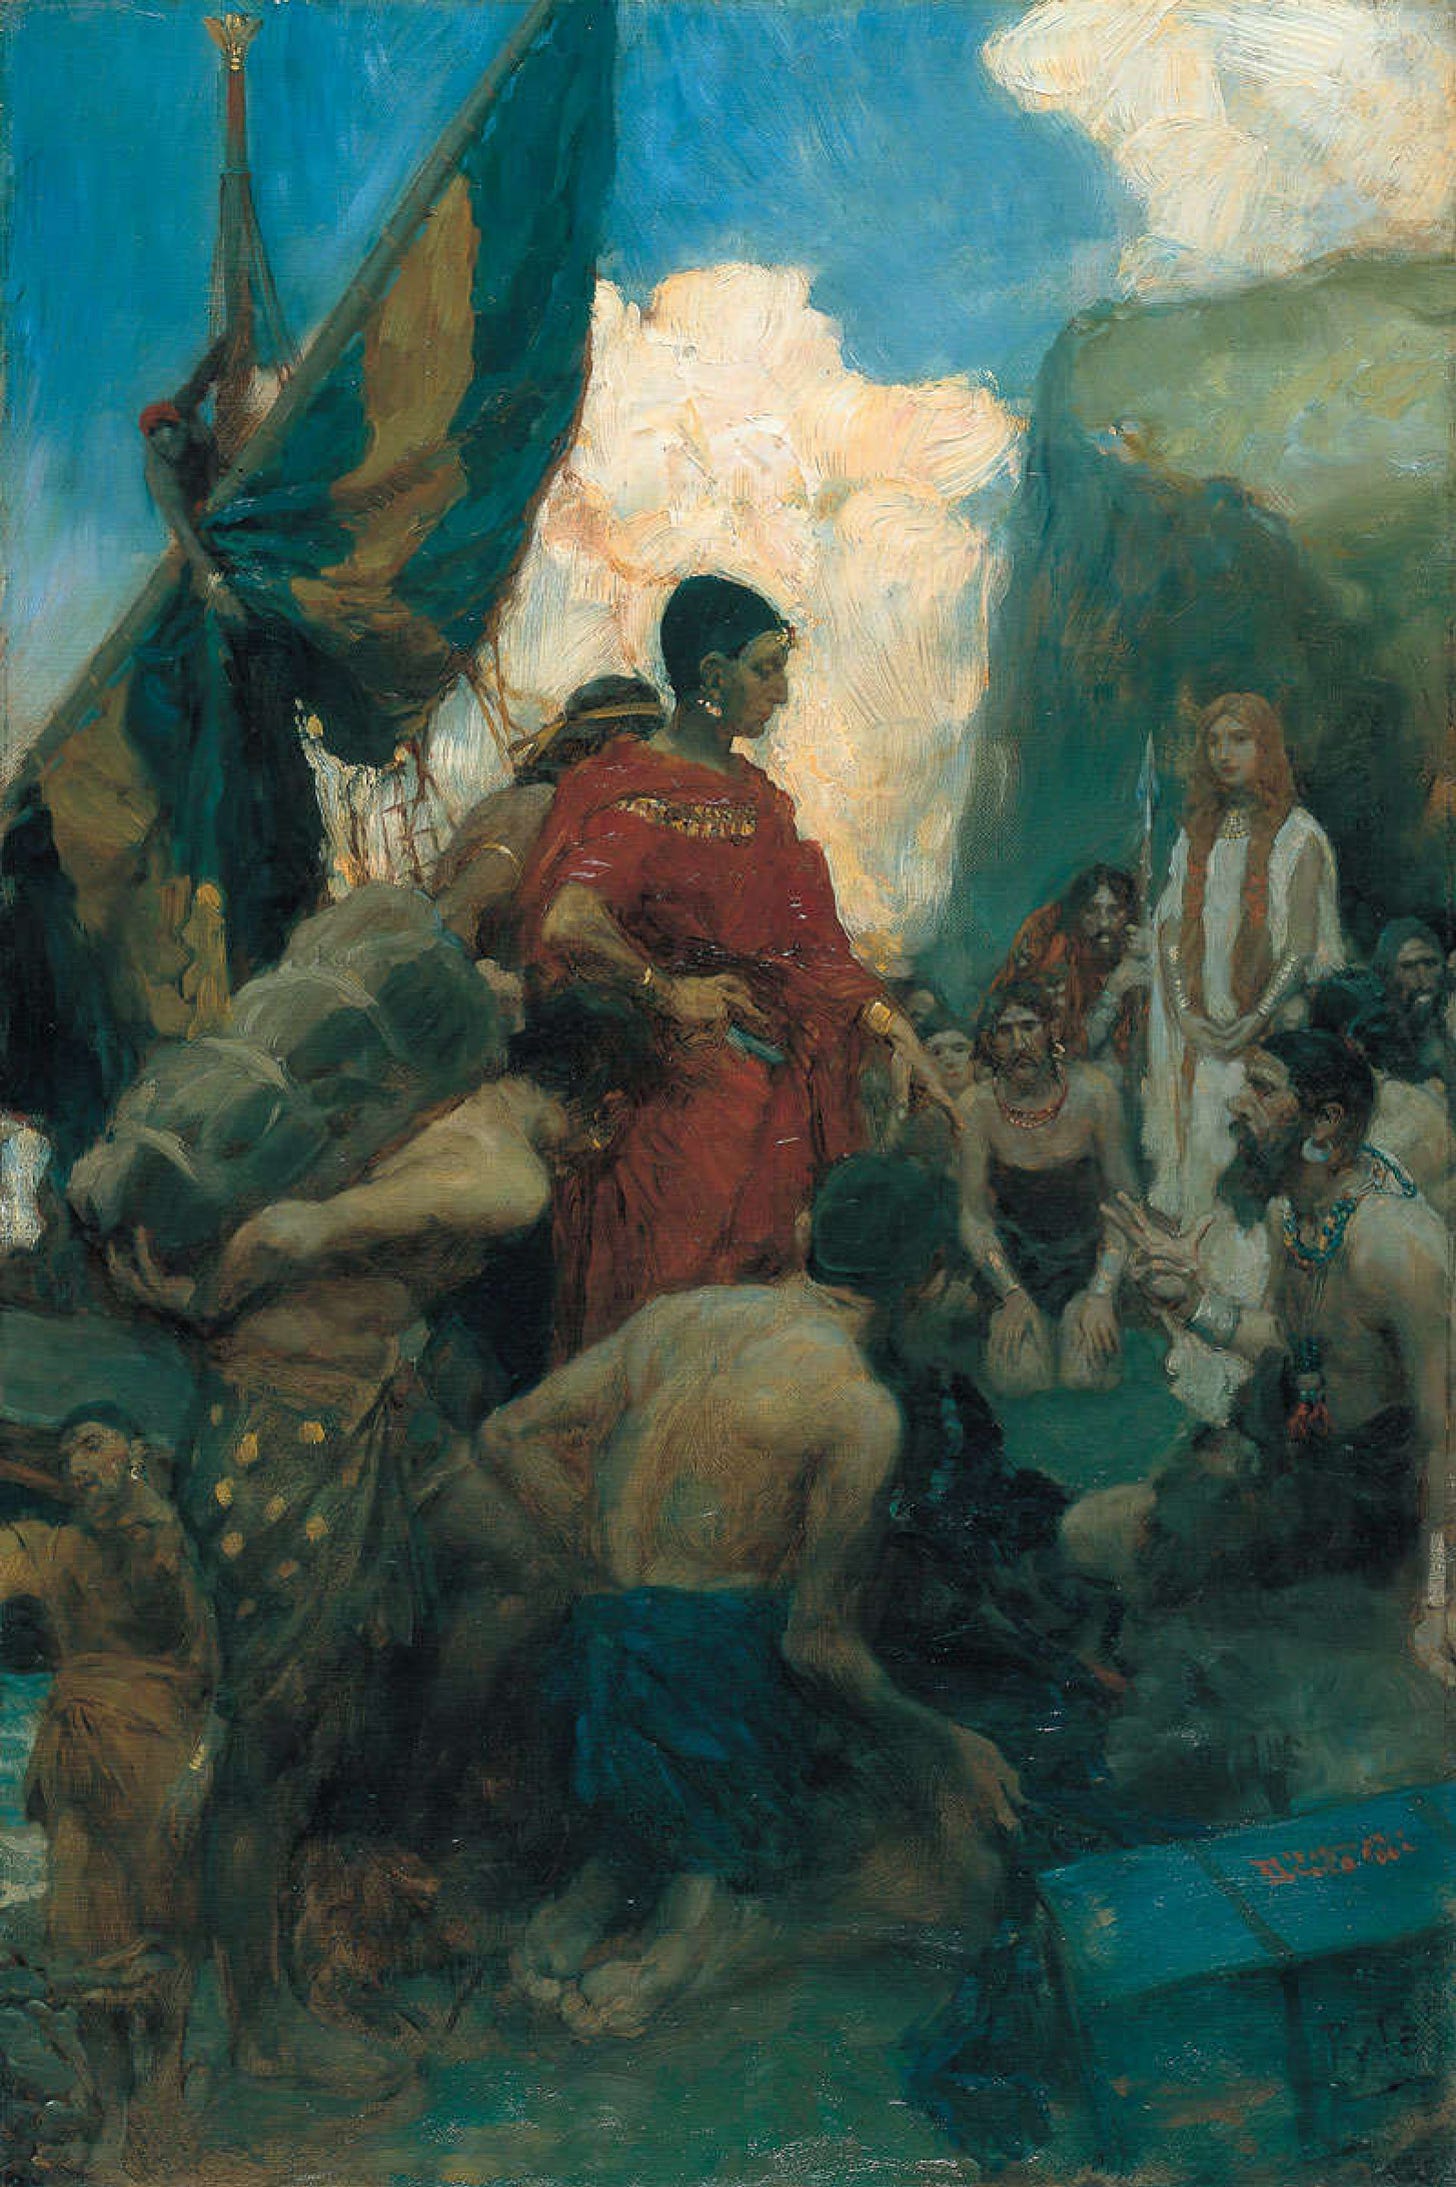 Phoenician merchants, 1914 by Howard Pyle: History, Analysis & Facts |  Arthive